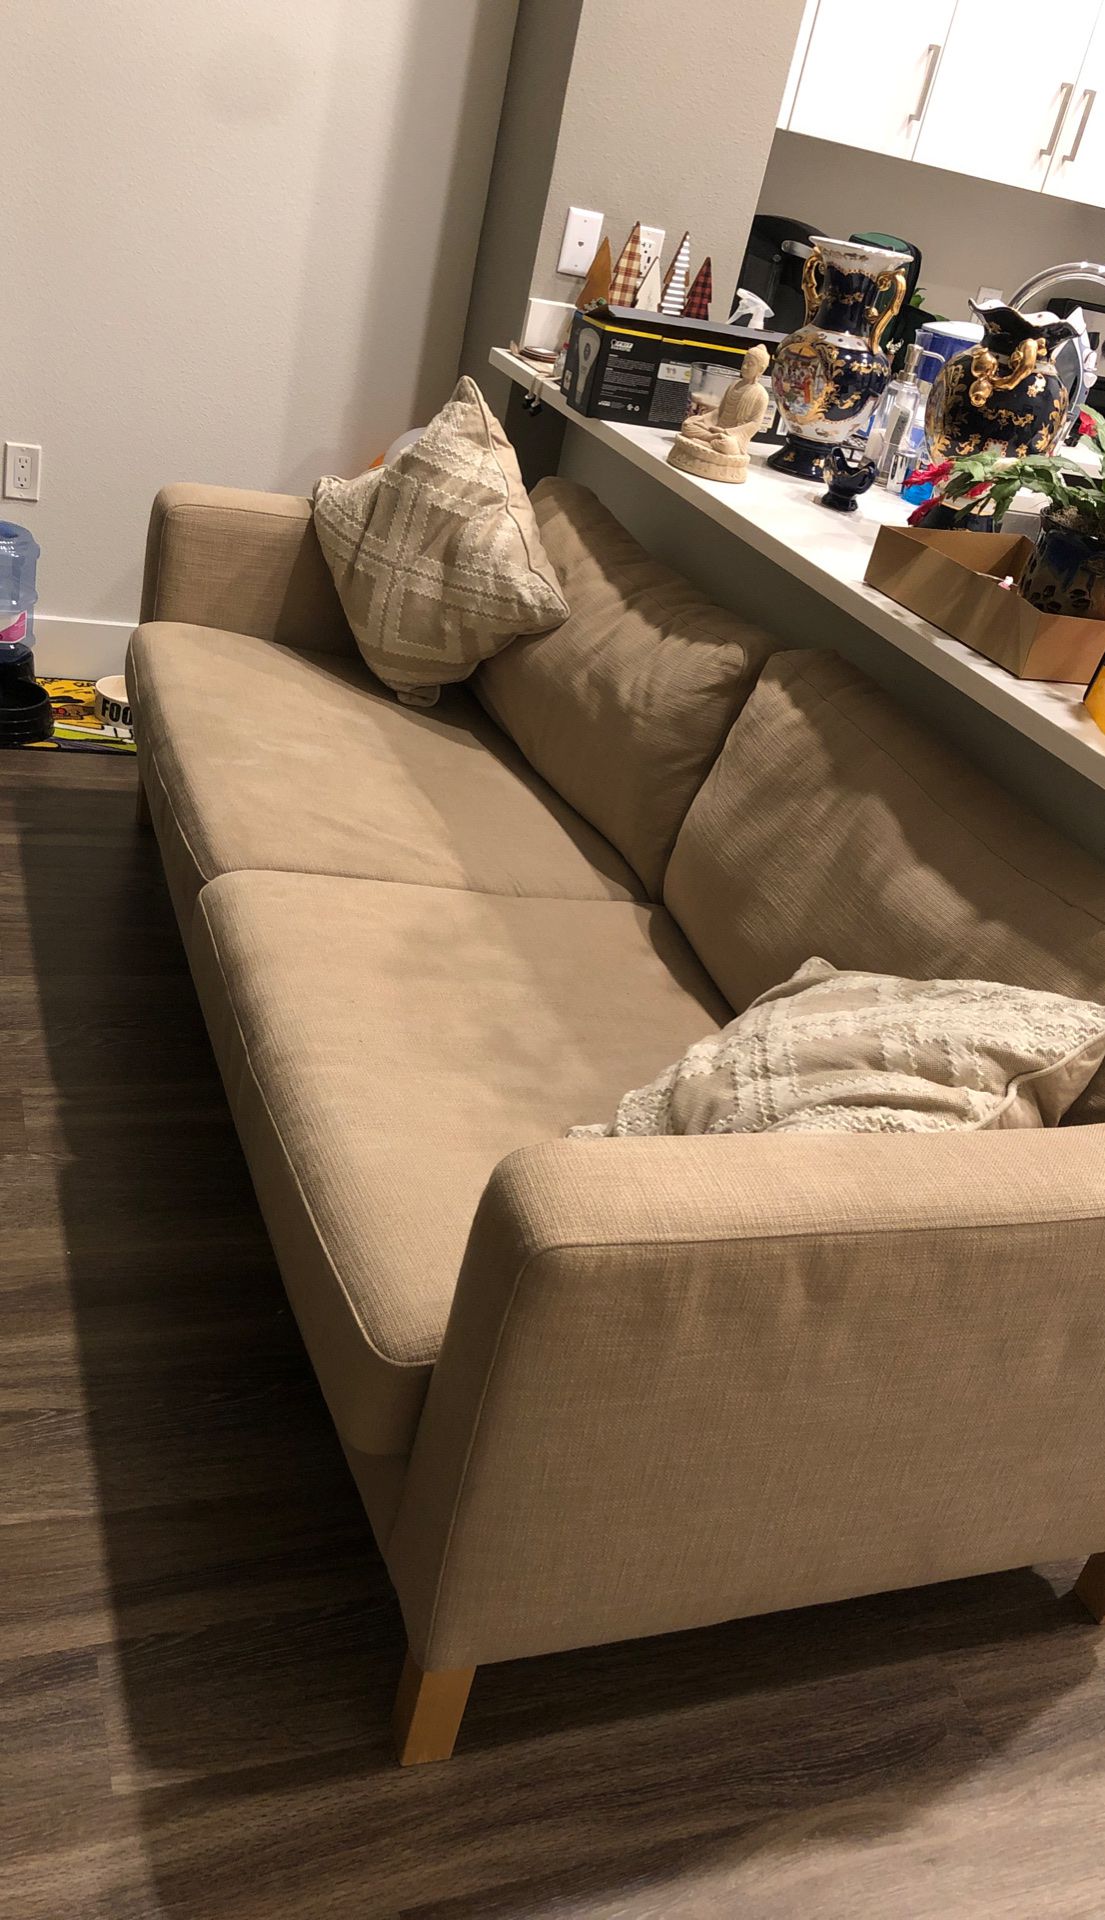 Furniture sale ( couch , coffee table , side table )